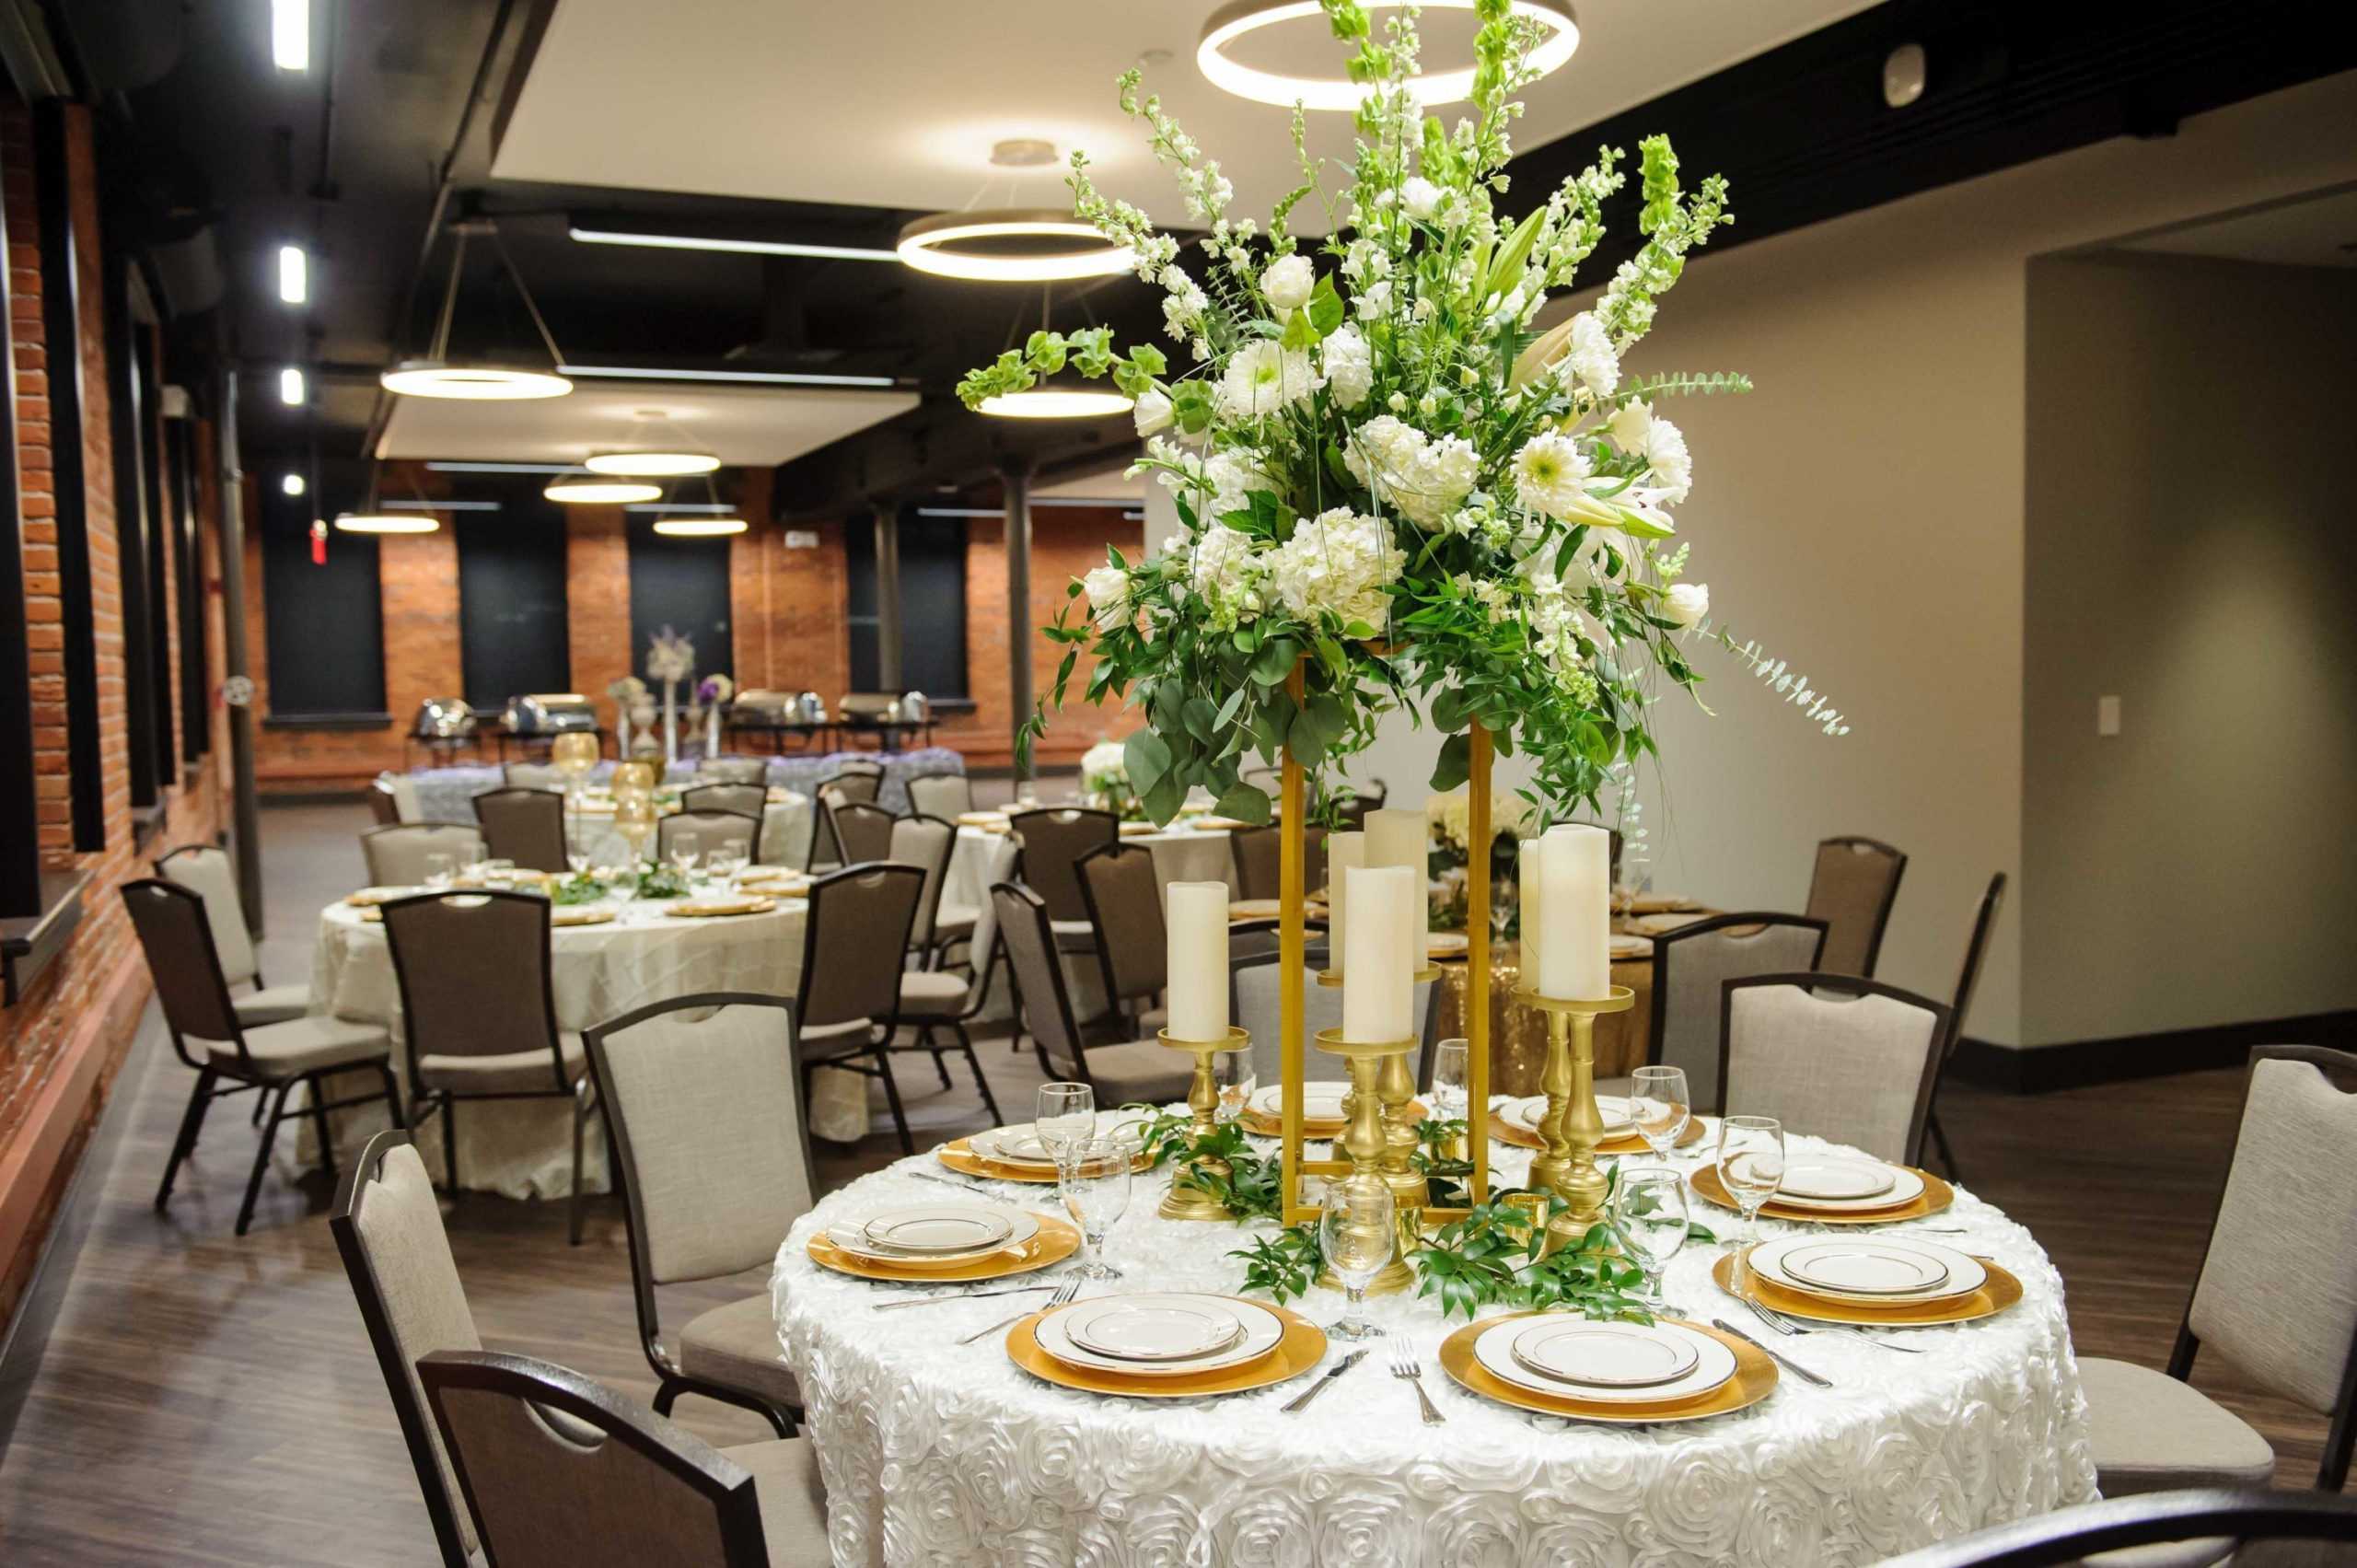 An example of a table setting in The Skybox.